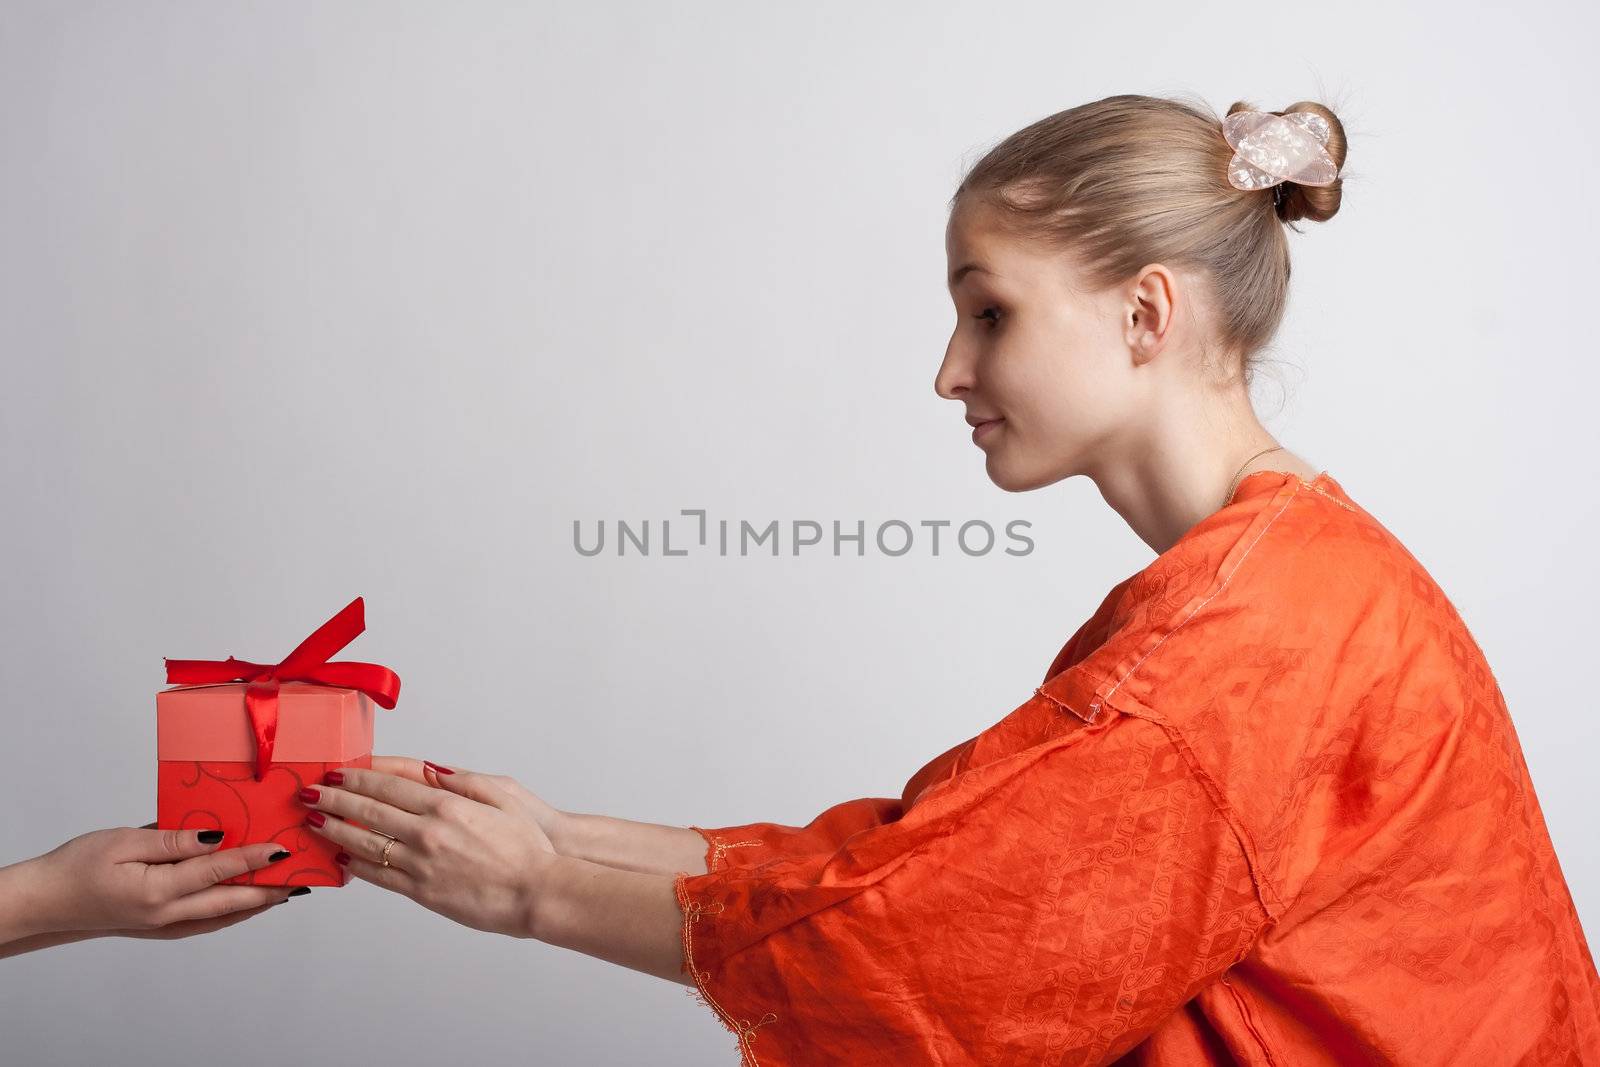 Girl in orange dress on a light background receives a gift